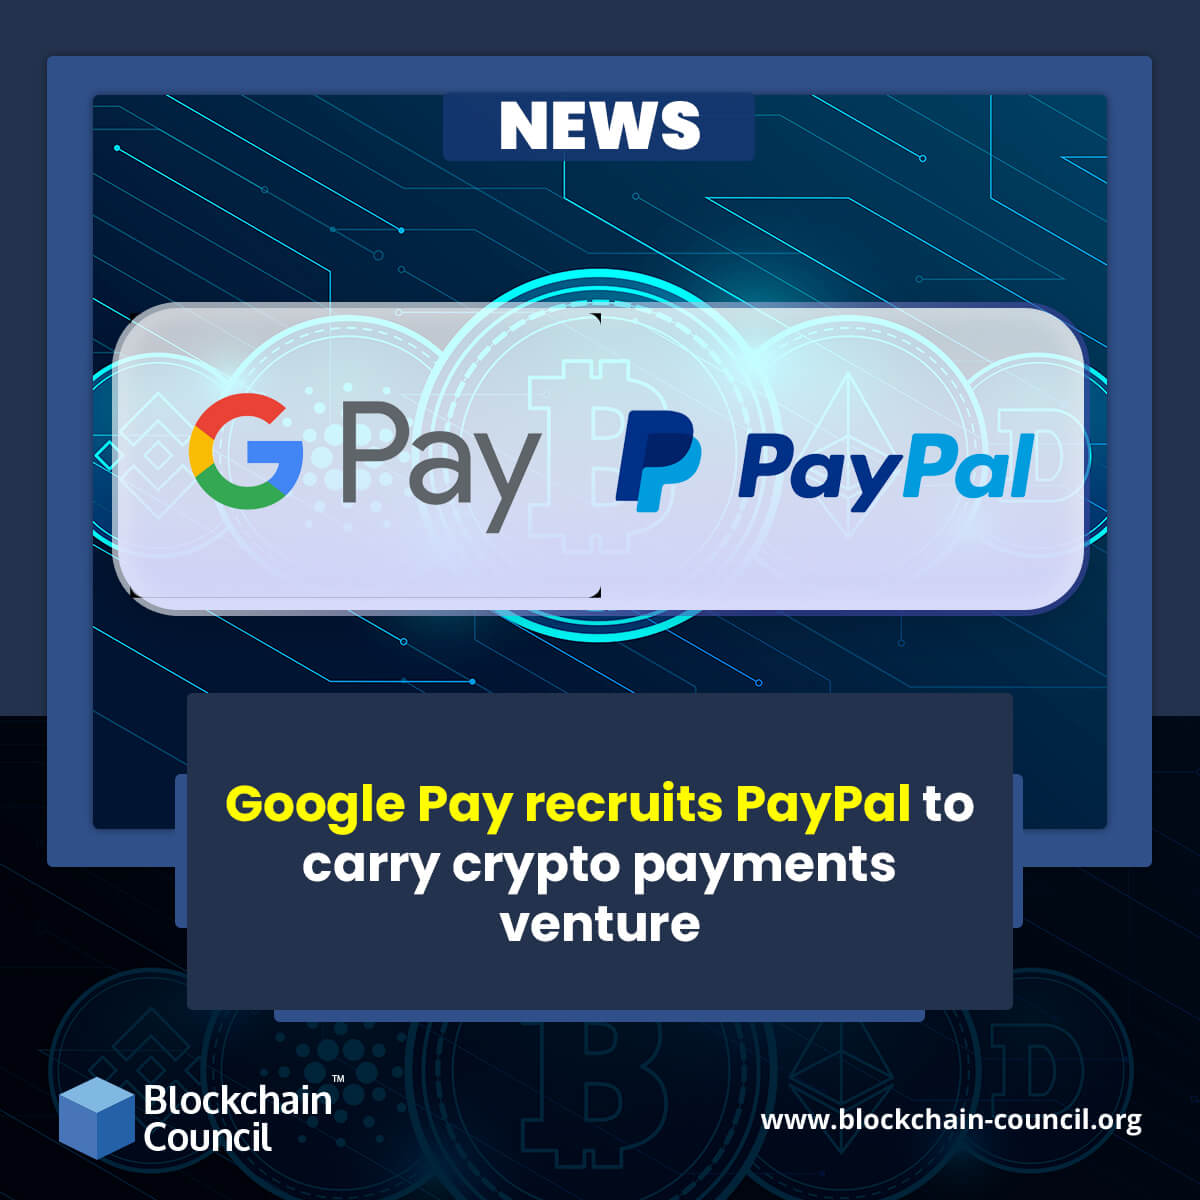 Google Pay recruits PayPal to carry crypto payments venture